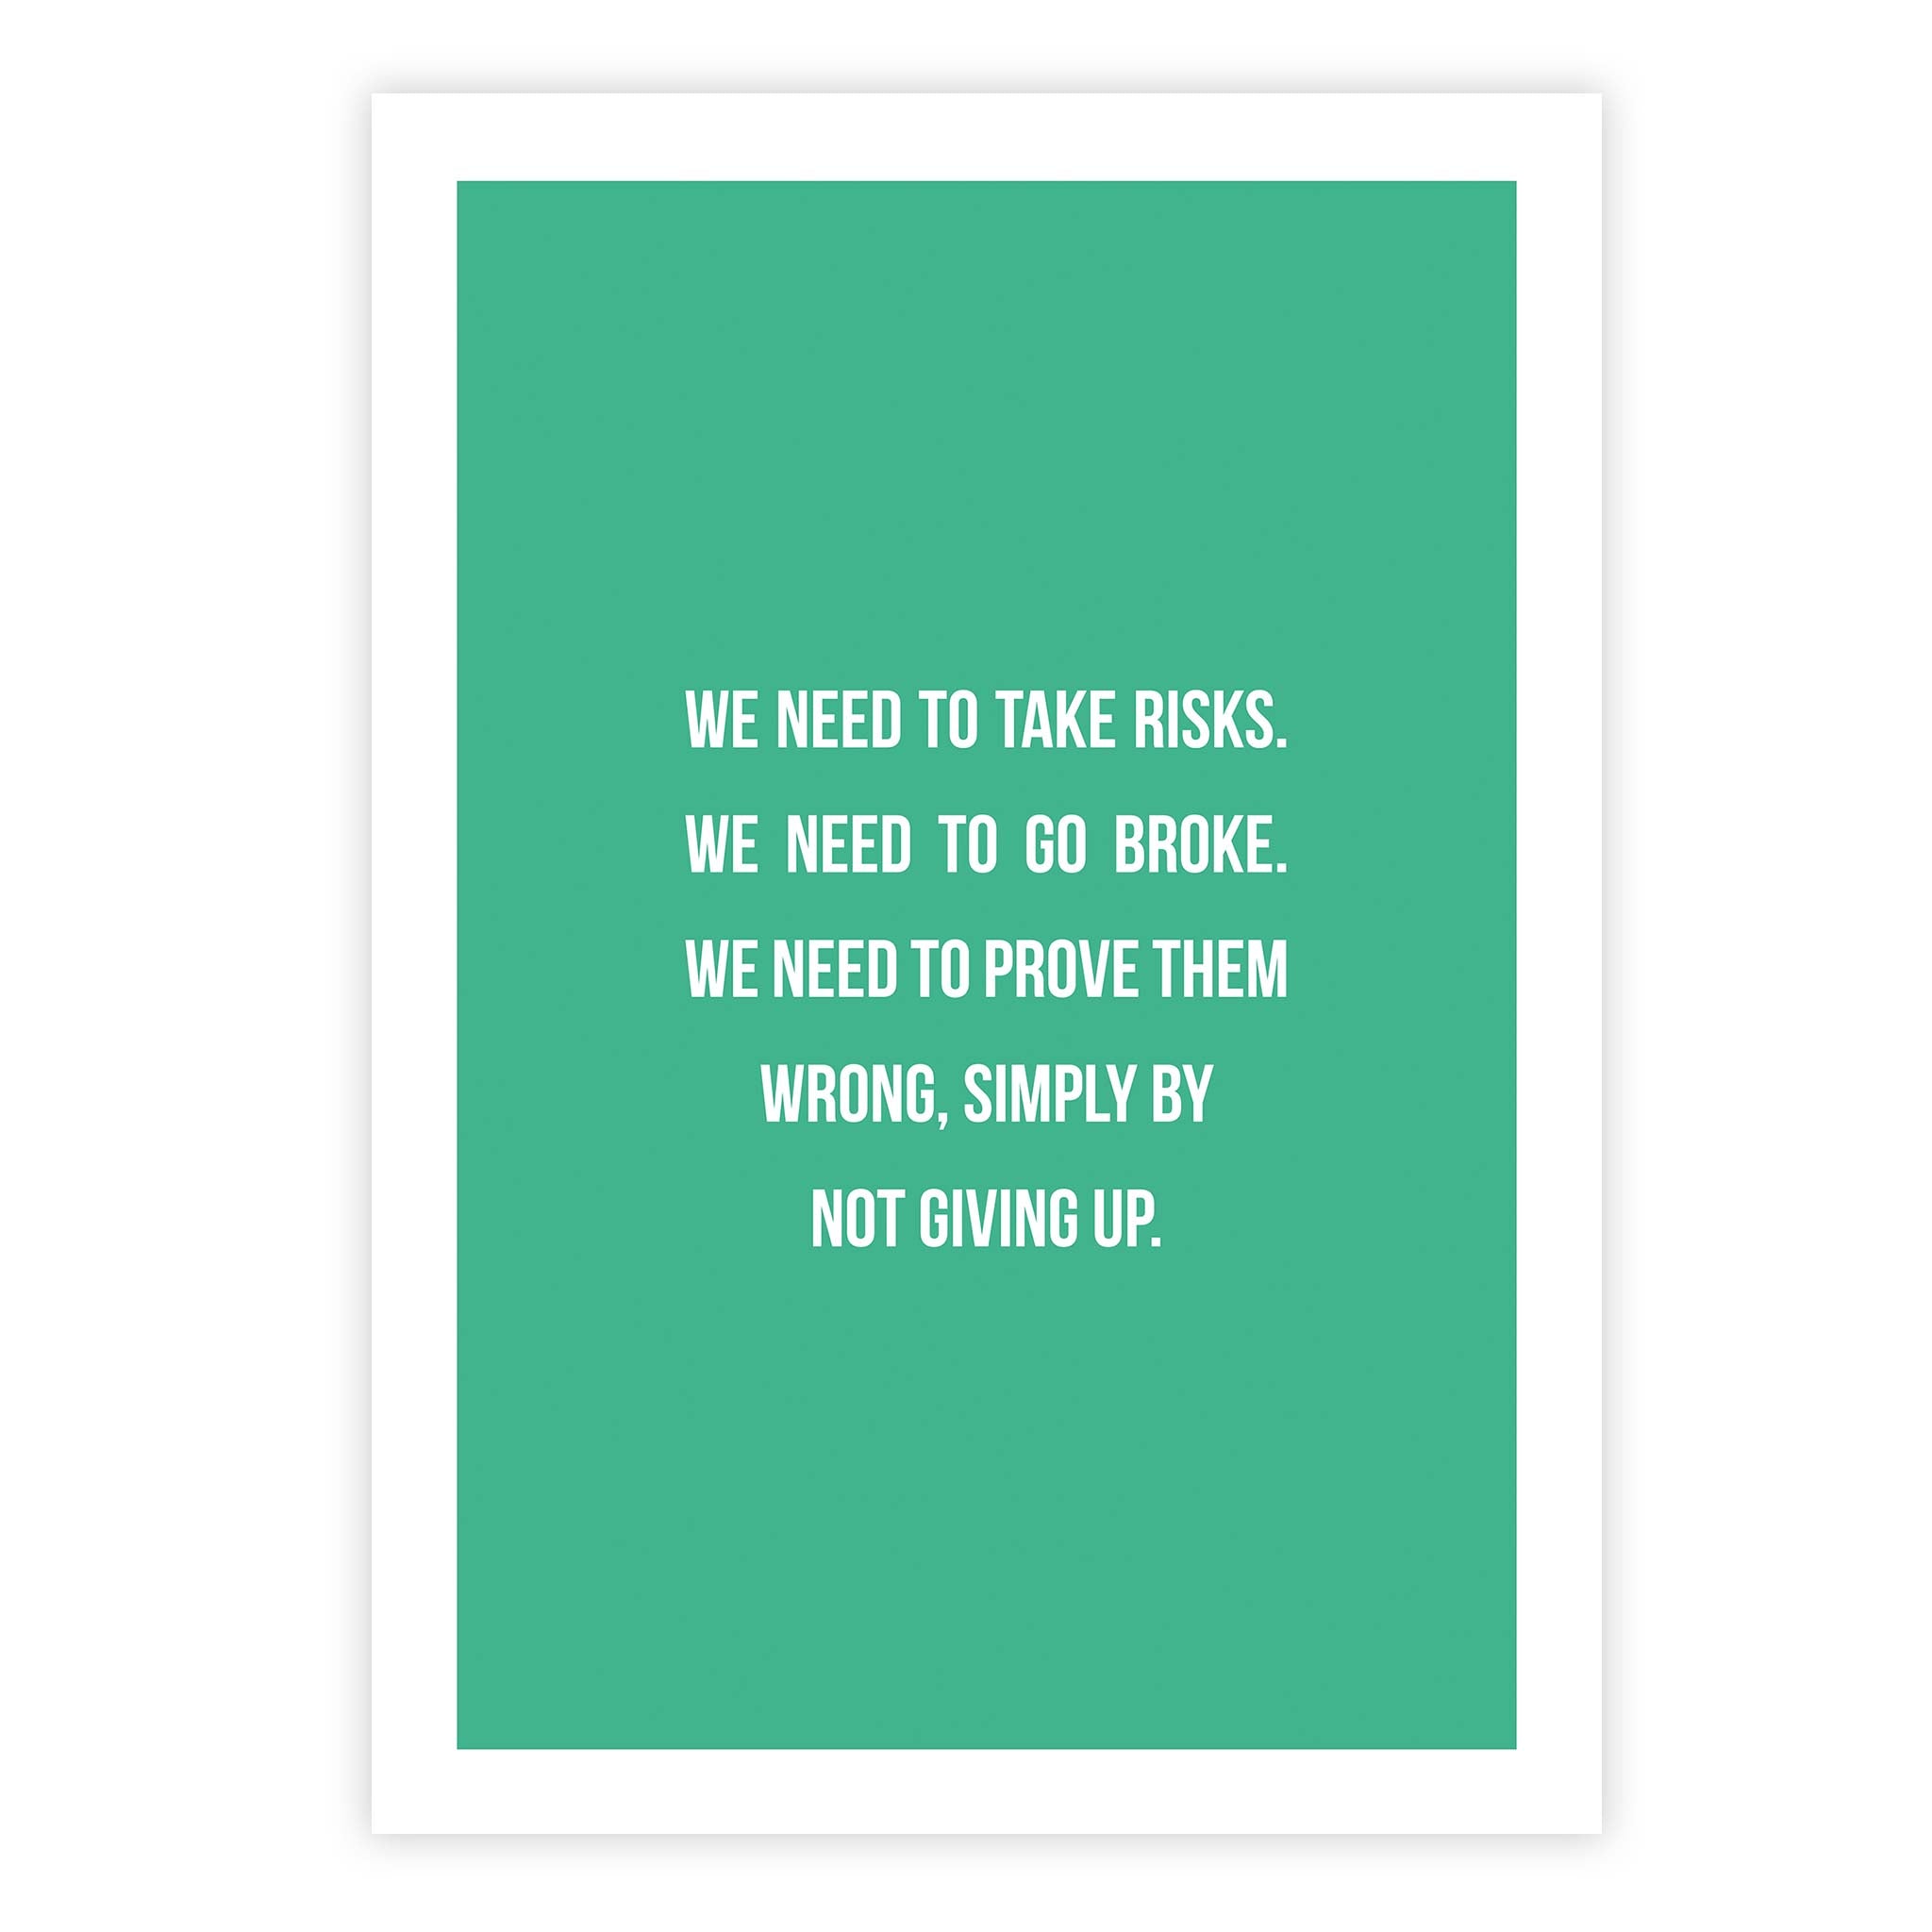 We need to take risks. We need to go broke. We need to prove them wrong, simply by not giving up